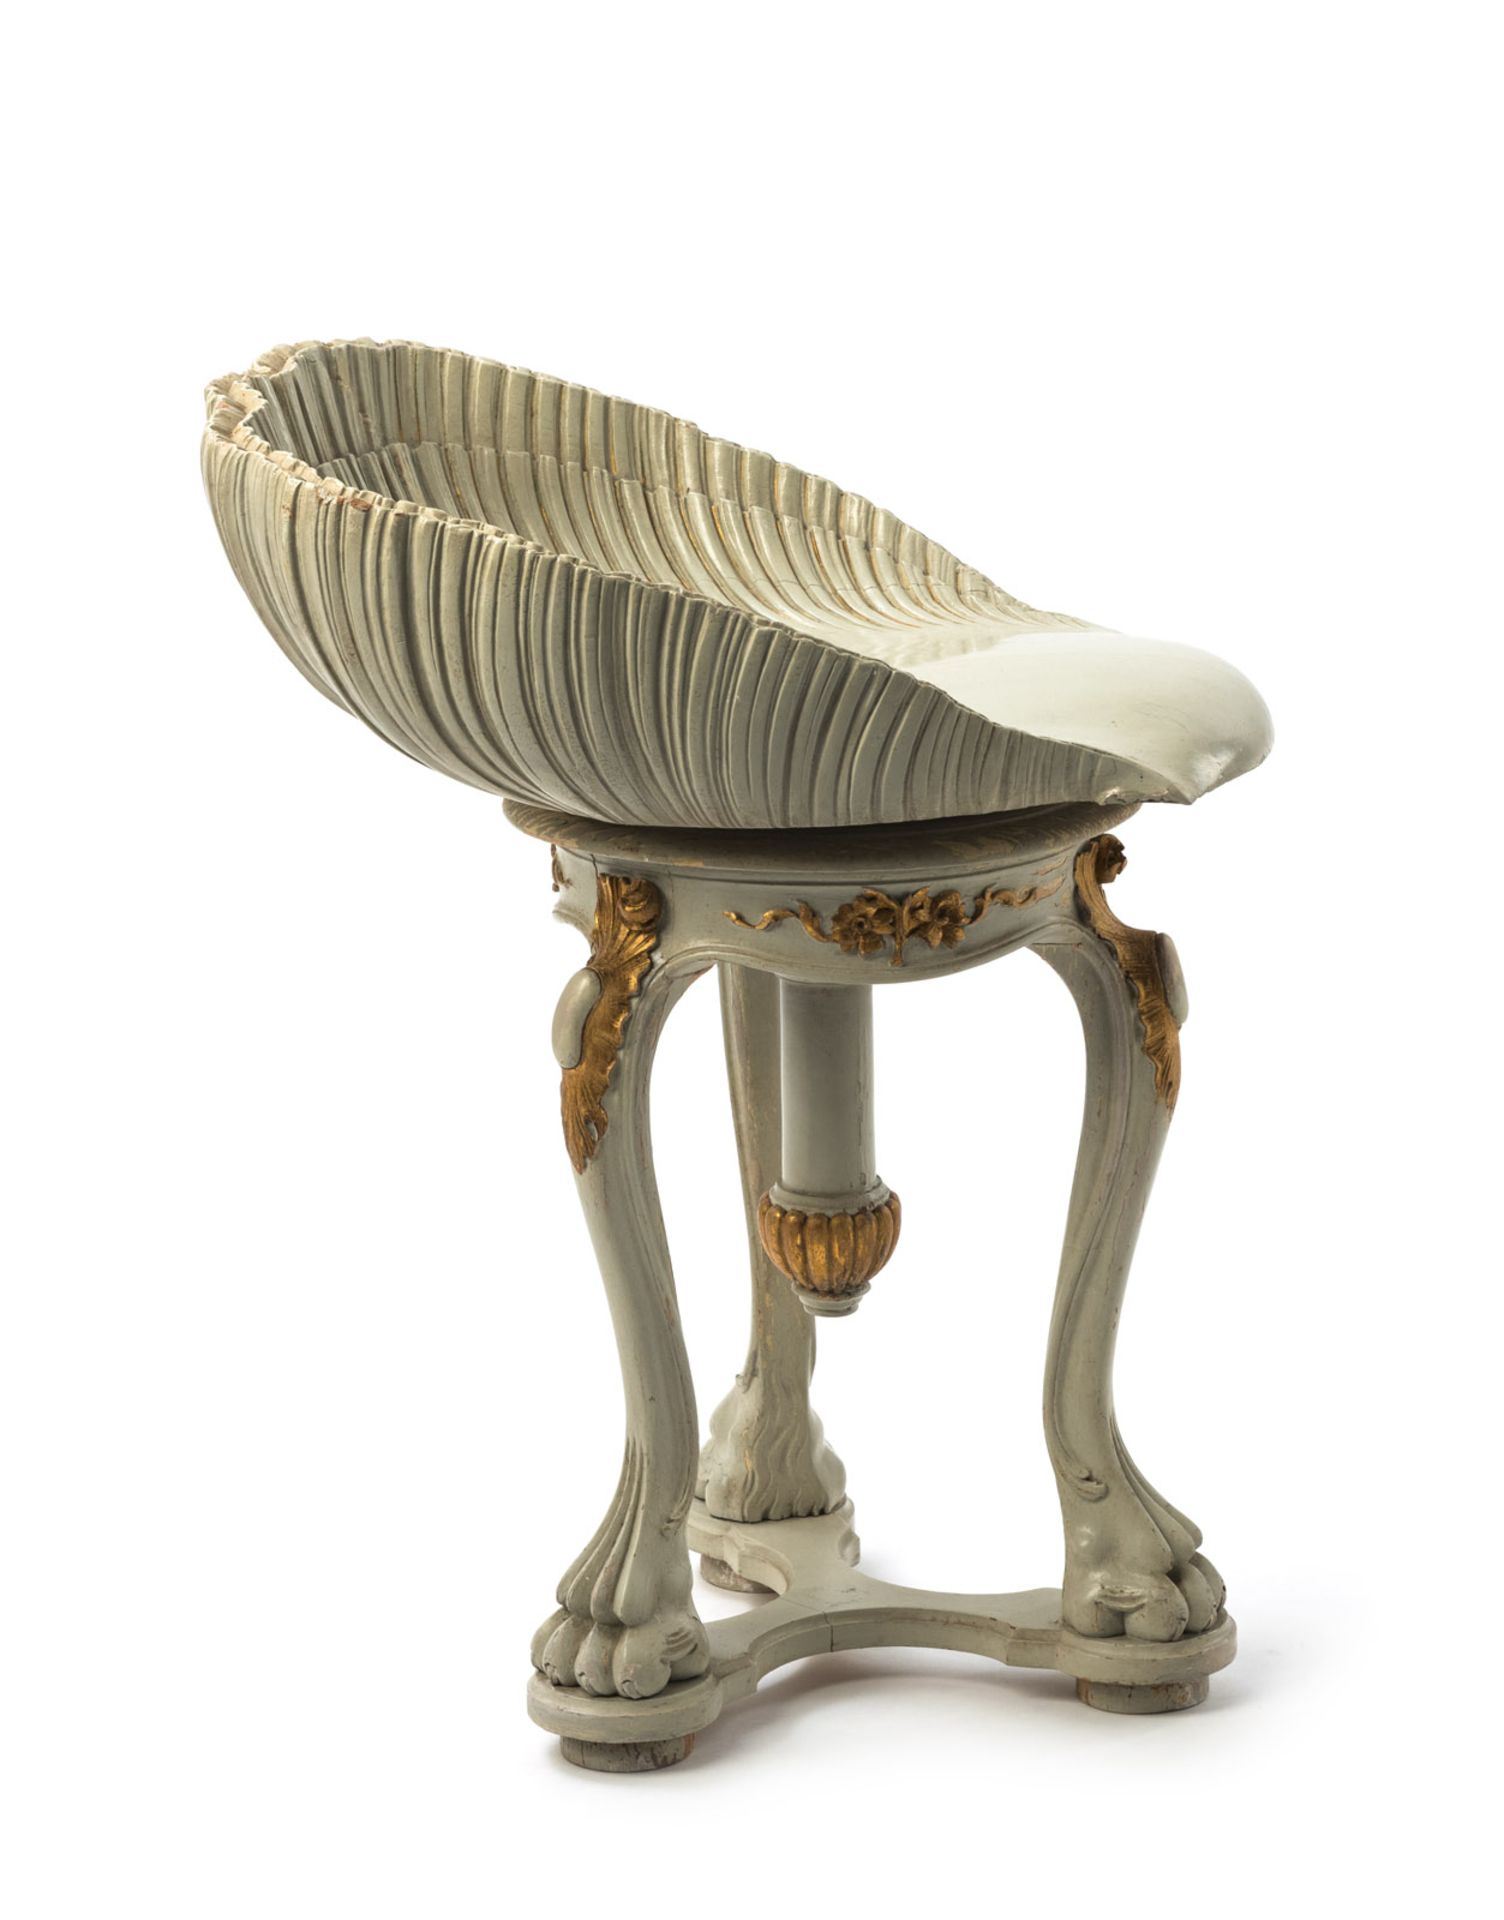 A BAROQUE STYLE PIANO STOOL WITH SHELL SHAPED SEAT - Image 2 of 4